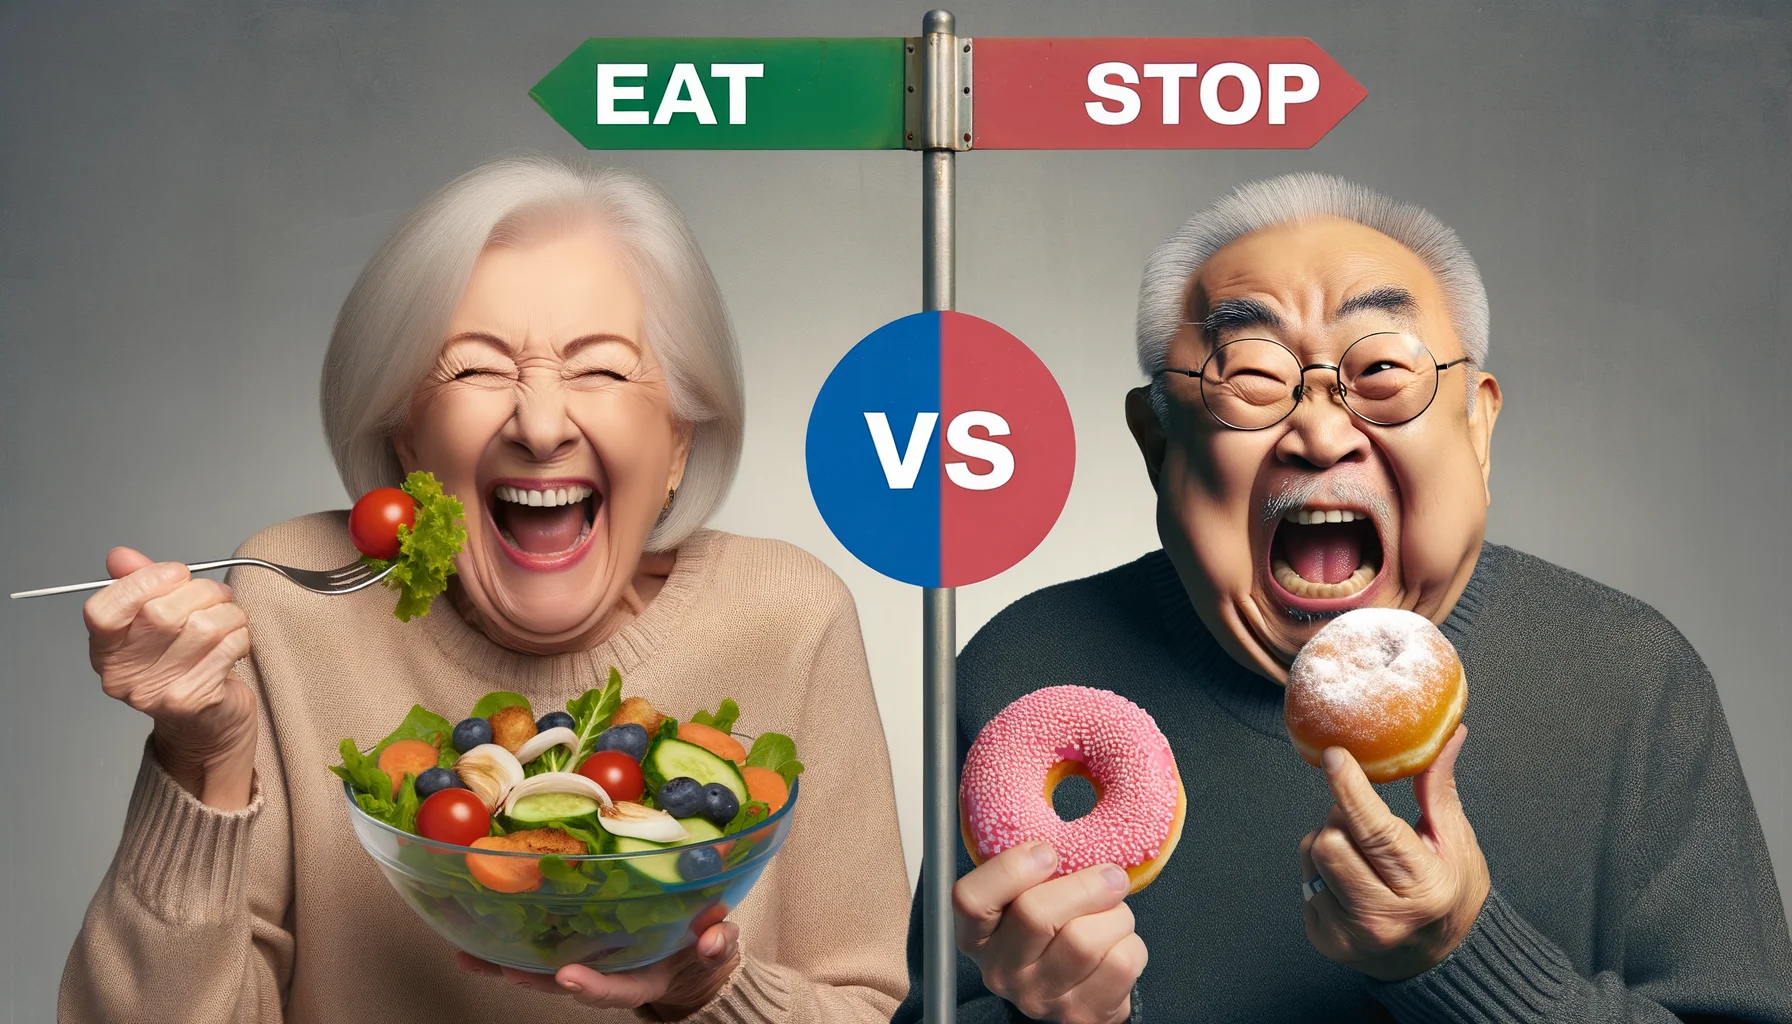 Generate a lighthearted, realistic image that humorously depicts the theme of 'eat, stop, eat' before and after. Picture an elderly Caucasian woman on one side, laughing joyously with a salad in her hand, depicting the 'eat' scenario. Simultaneously, show an elderly Asian man on the other side, depicting the 'stop' scenario where he's making a hilarious face while he is refraining from eating a doughnut. In the middle of the image, place a large playful 'VS' sign separating the two scenes, adding to the humorous feel of the image.